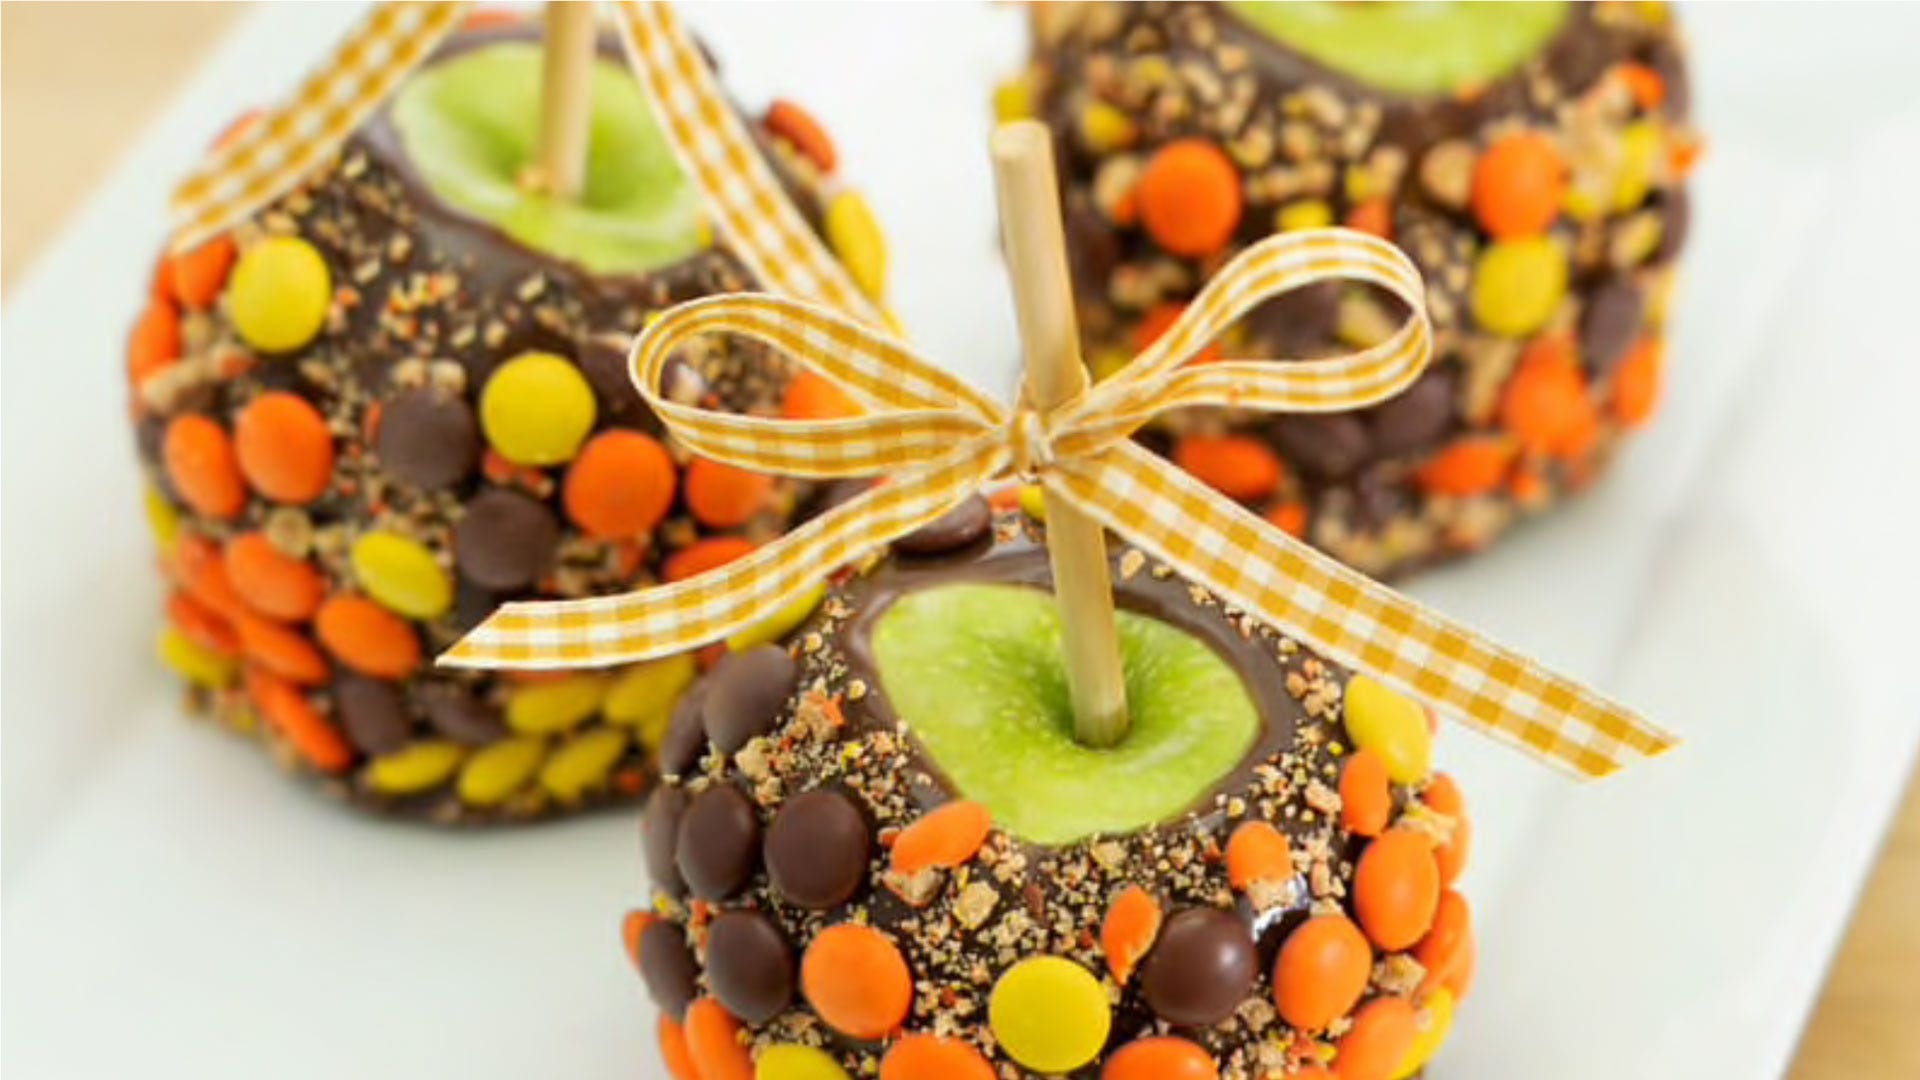 Image of REESE'S PIECES Candy Chocolate and Caramel Apple